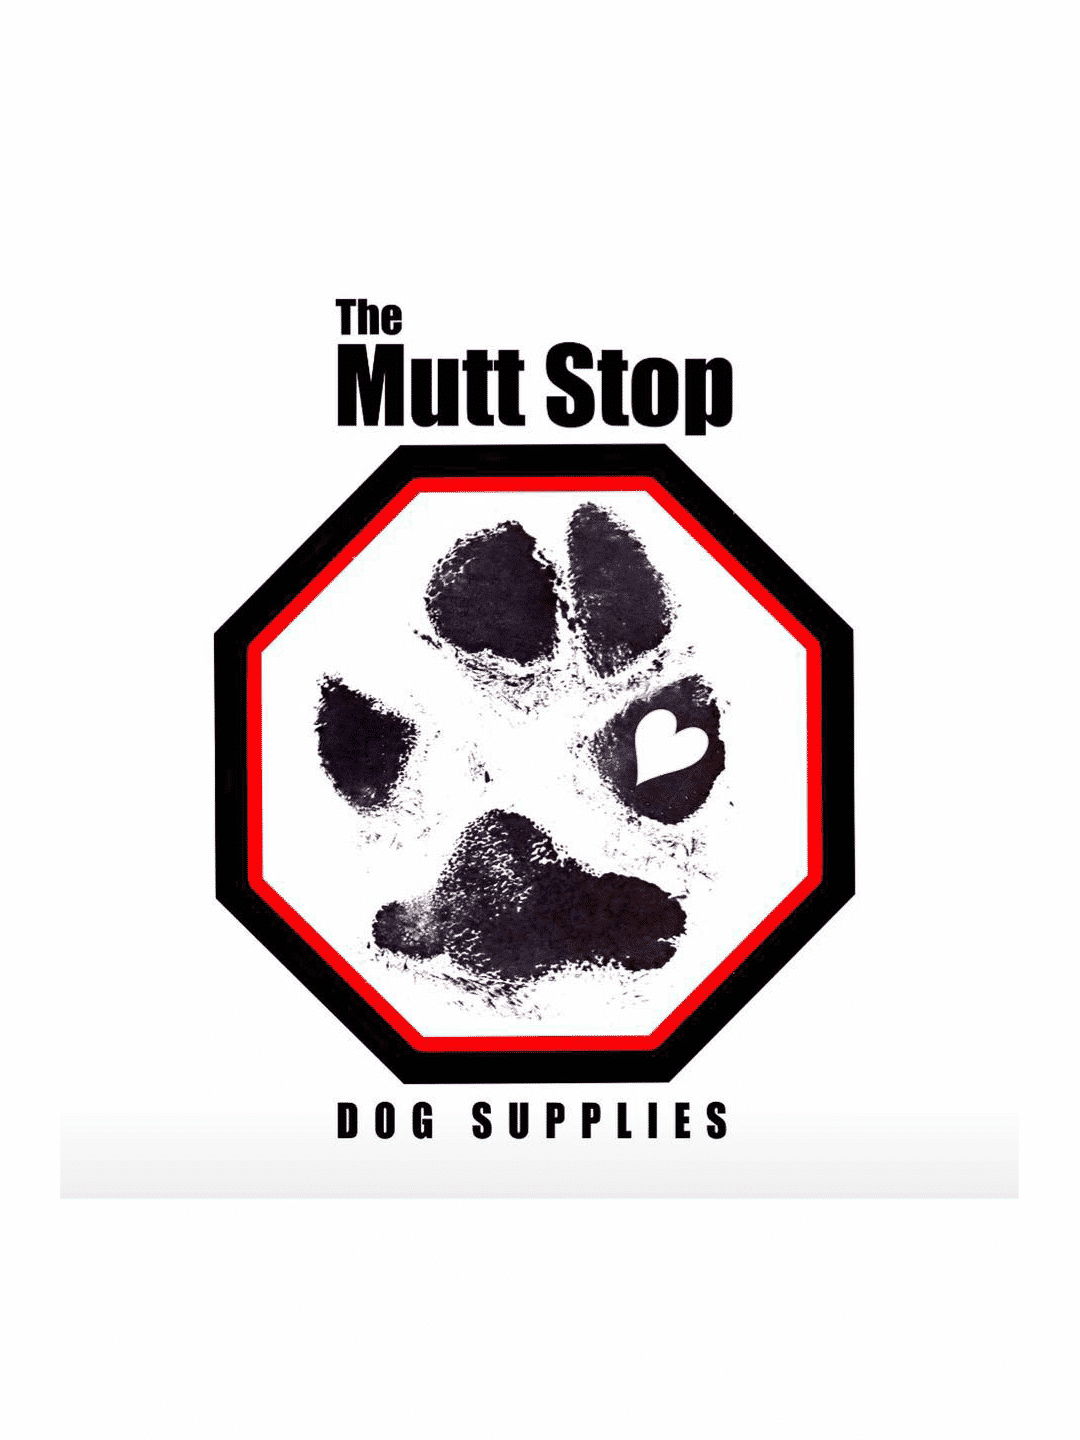 The mutt stop